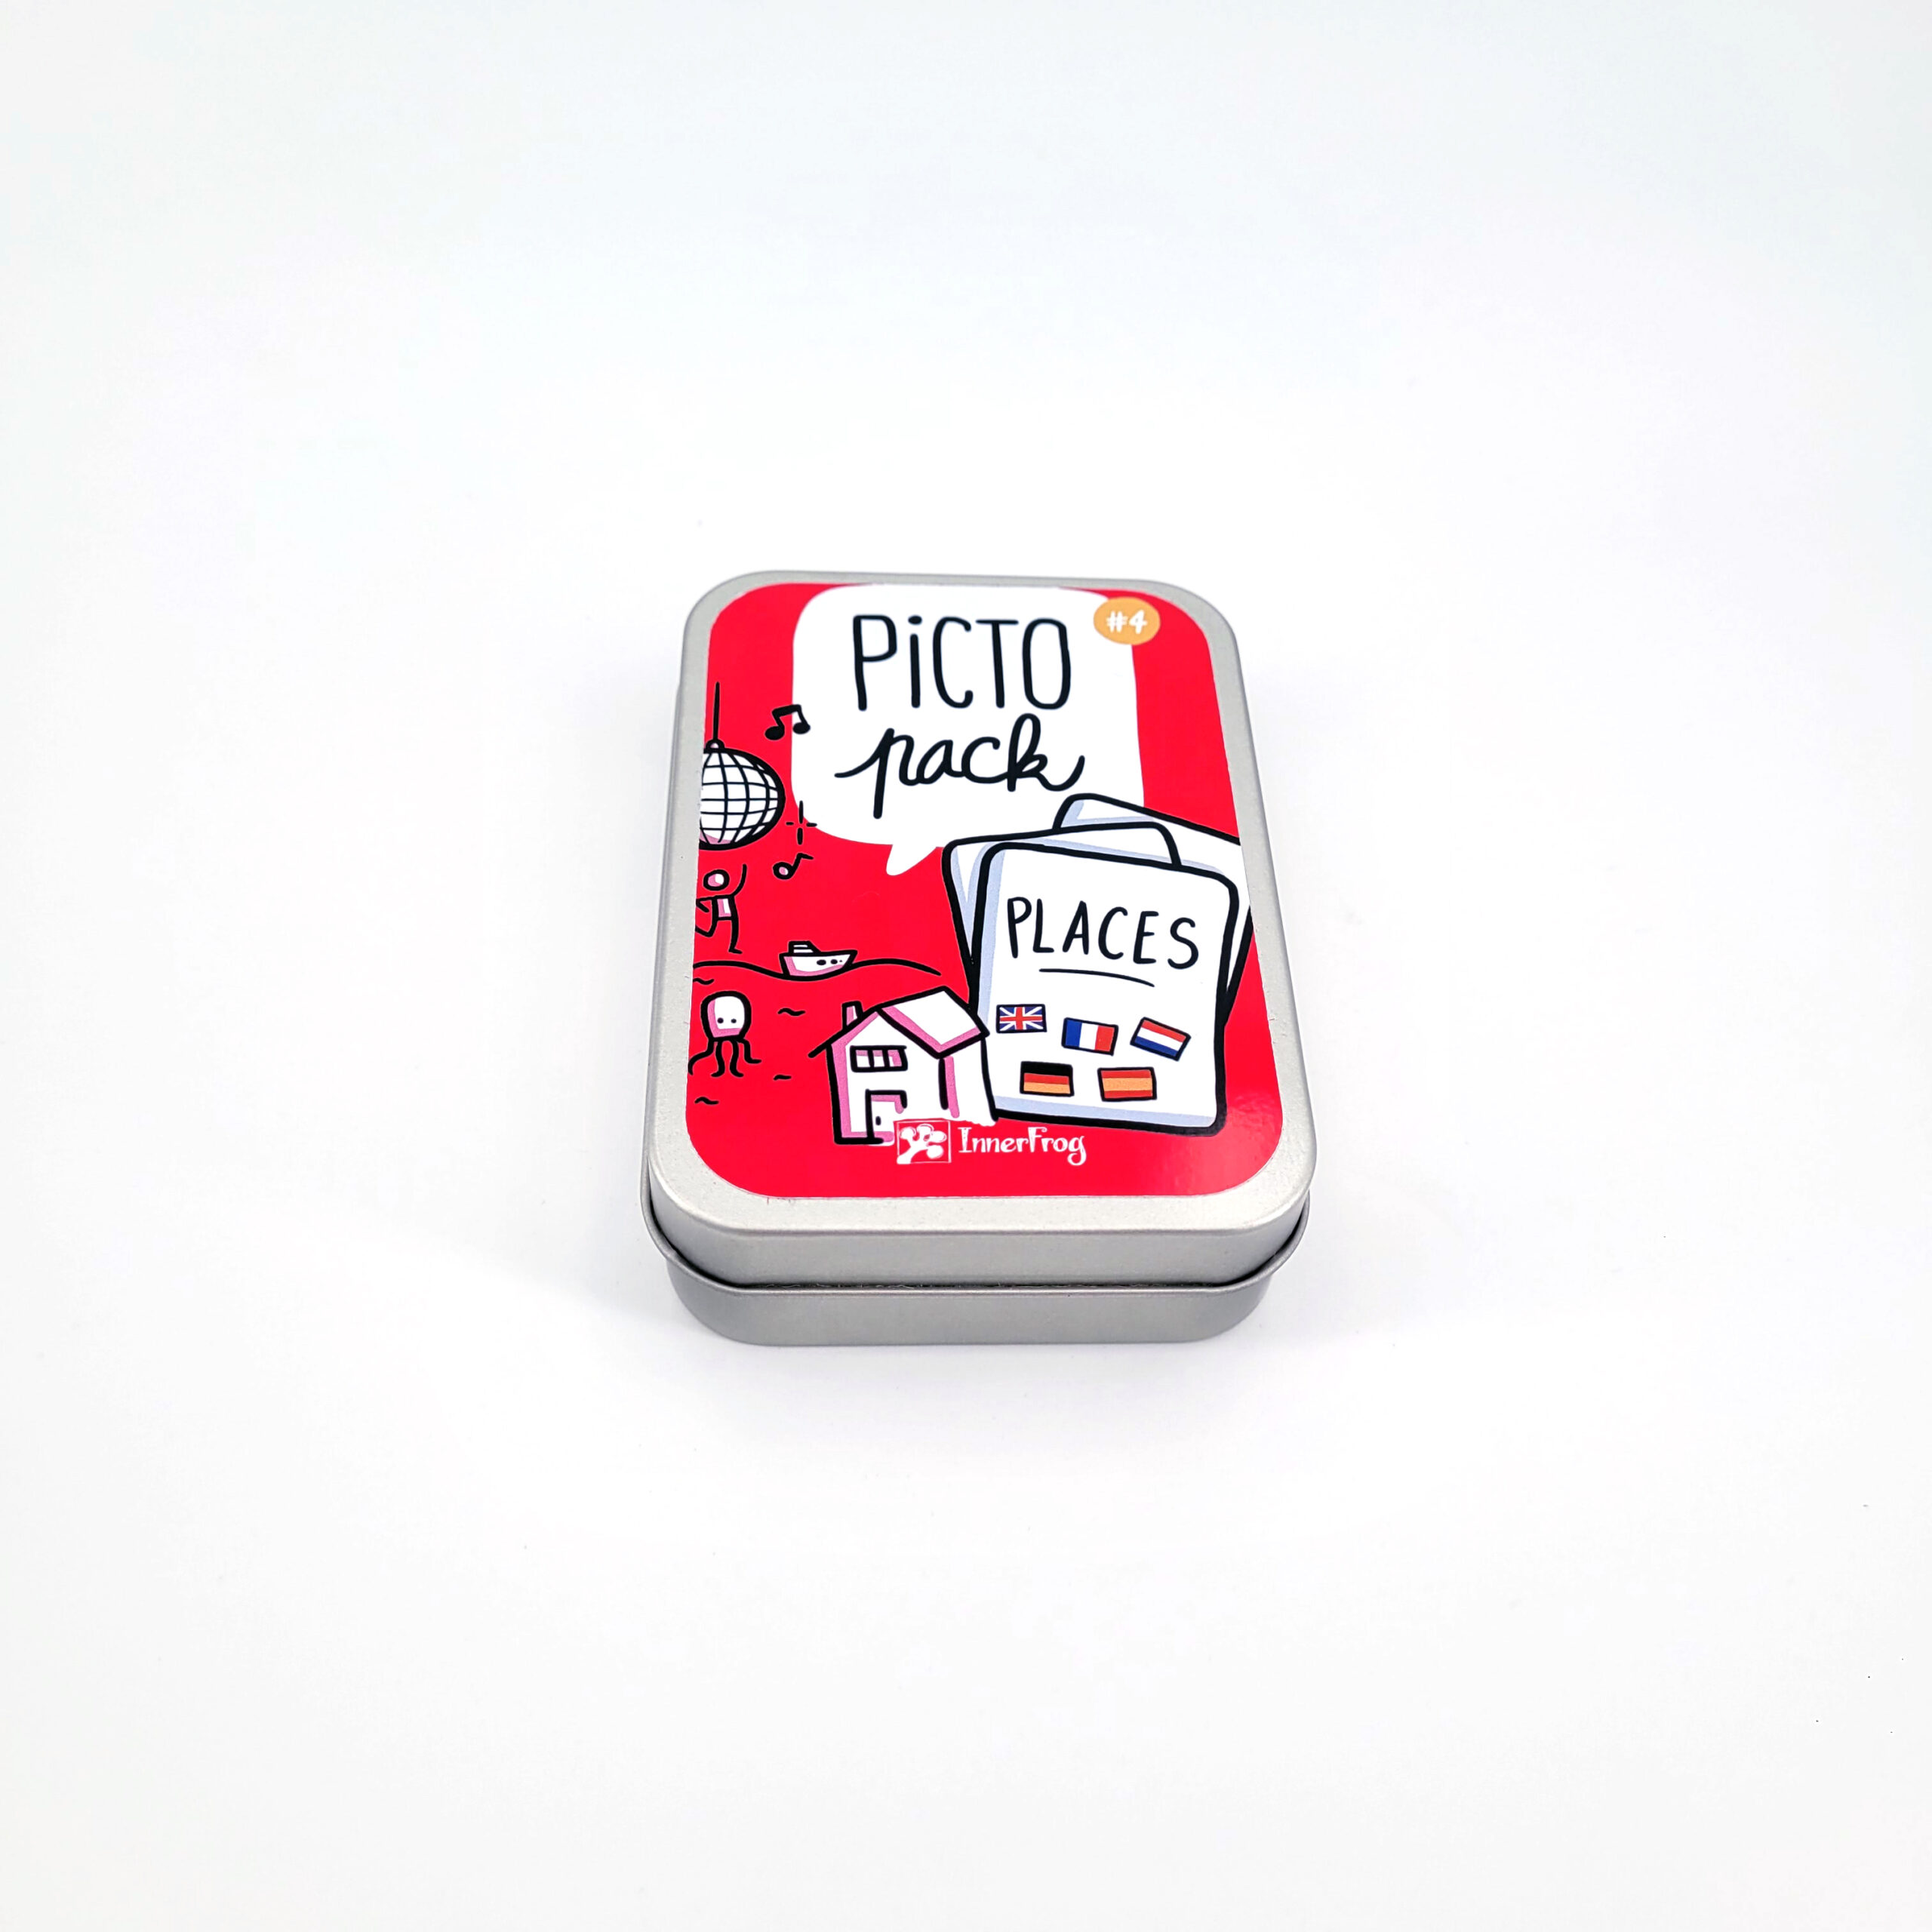 Picto Pack 4 - Places 9